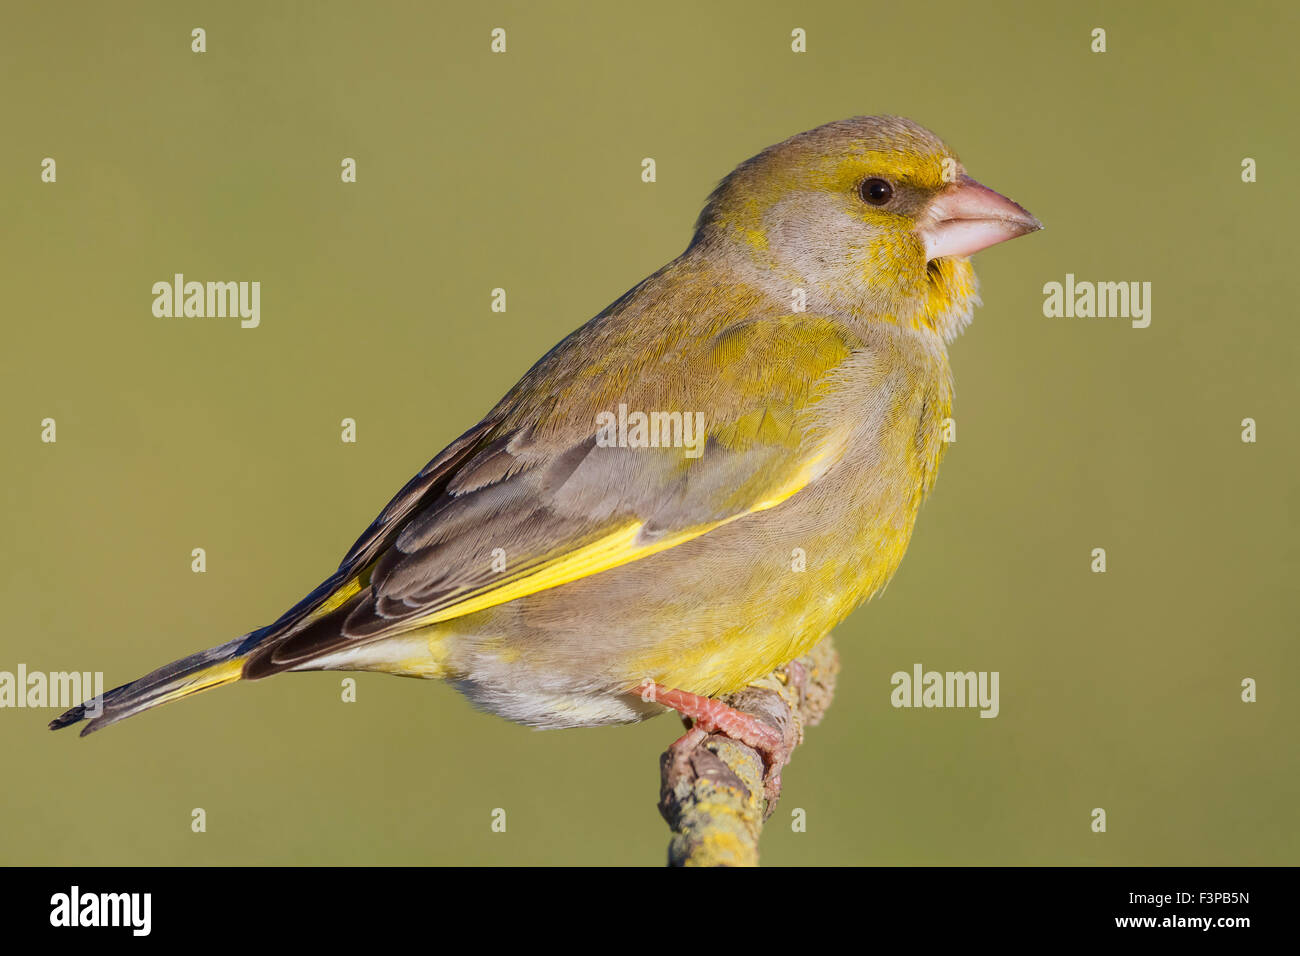 European Greenfinch, Male perched on a branch, Campania, Italy (Carduelis chloris) Stock Photo